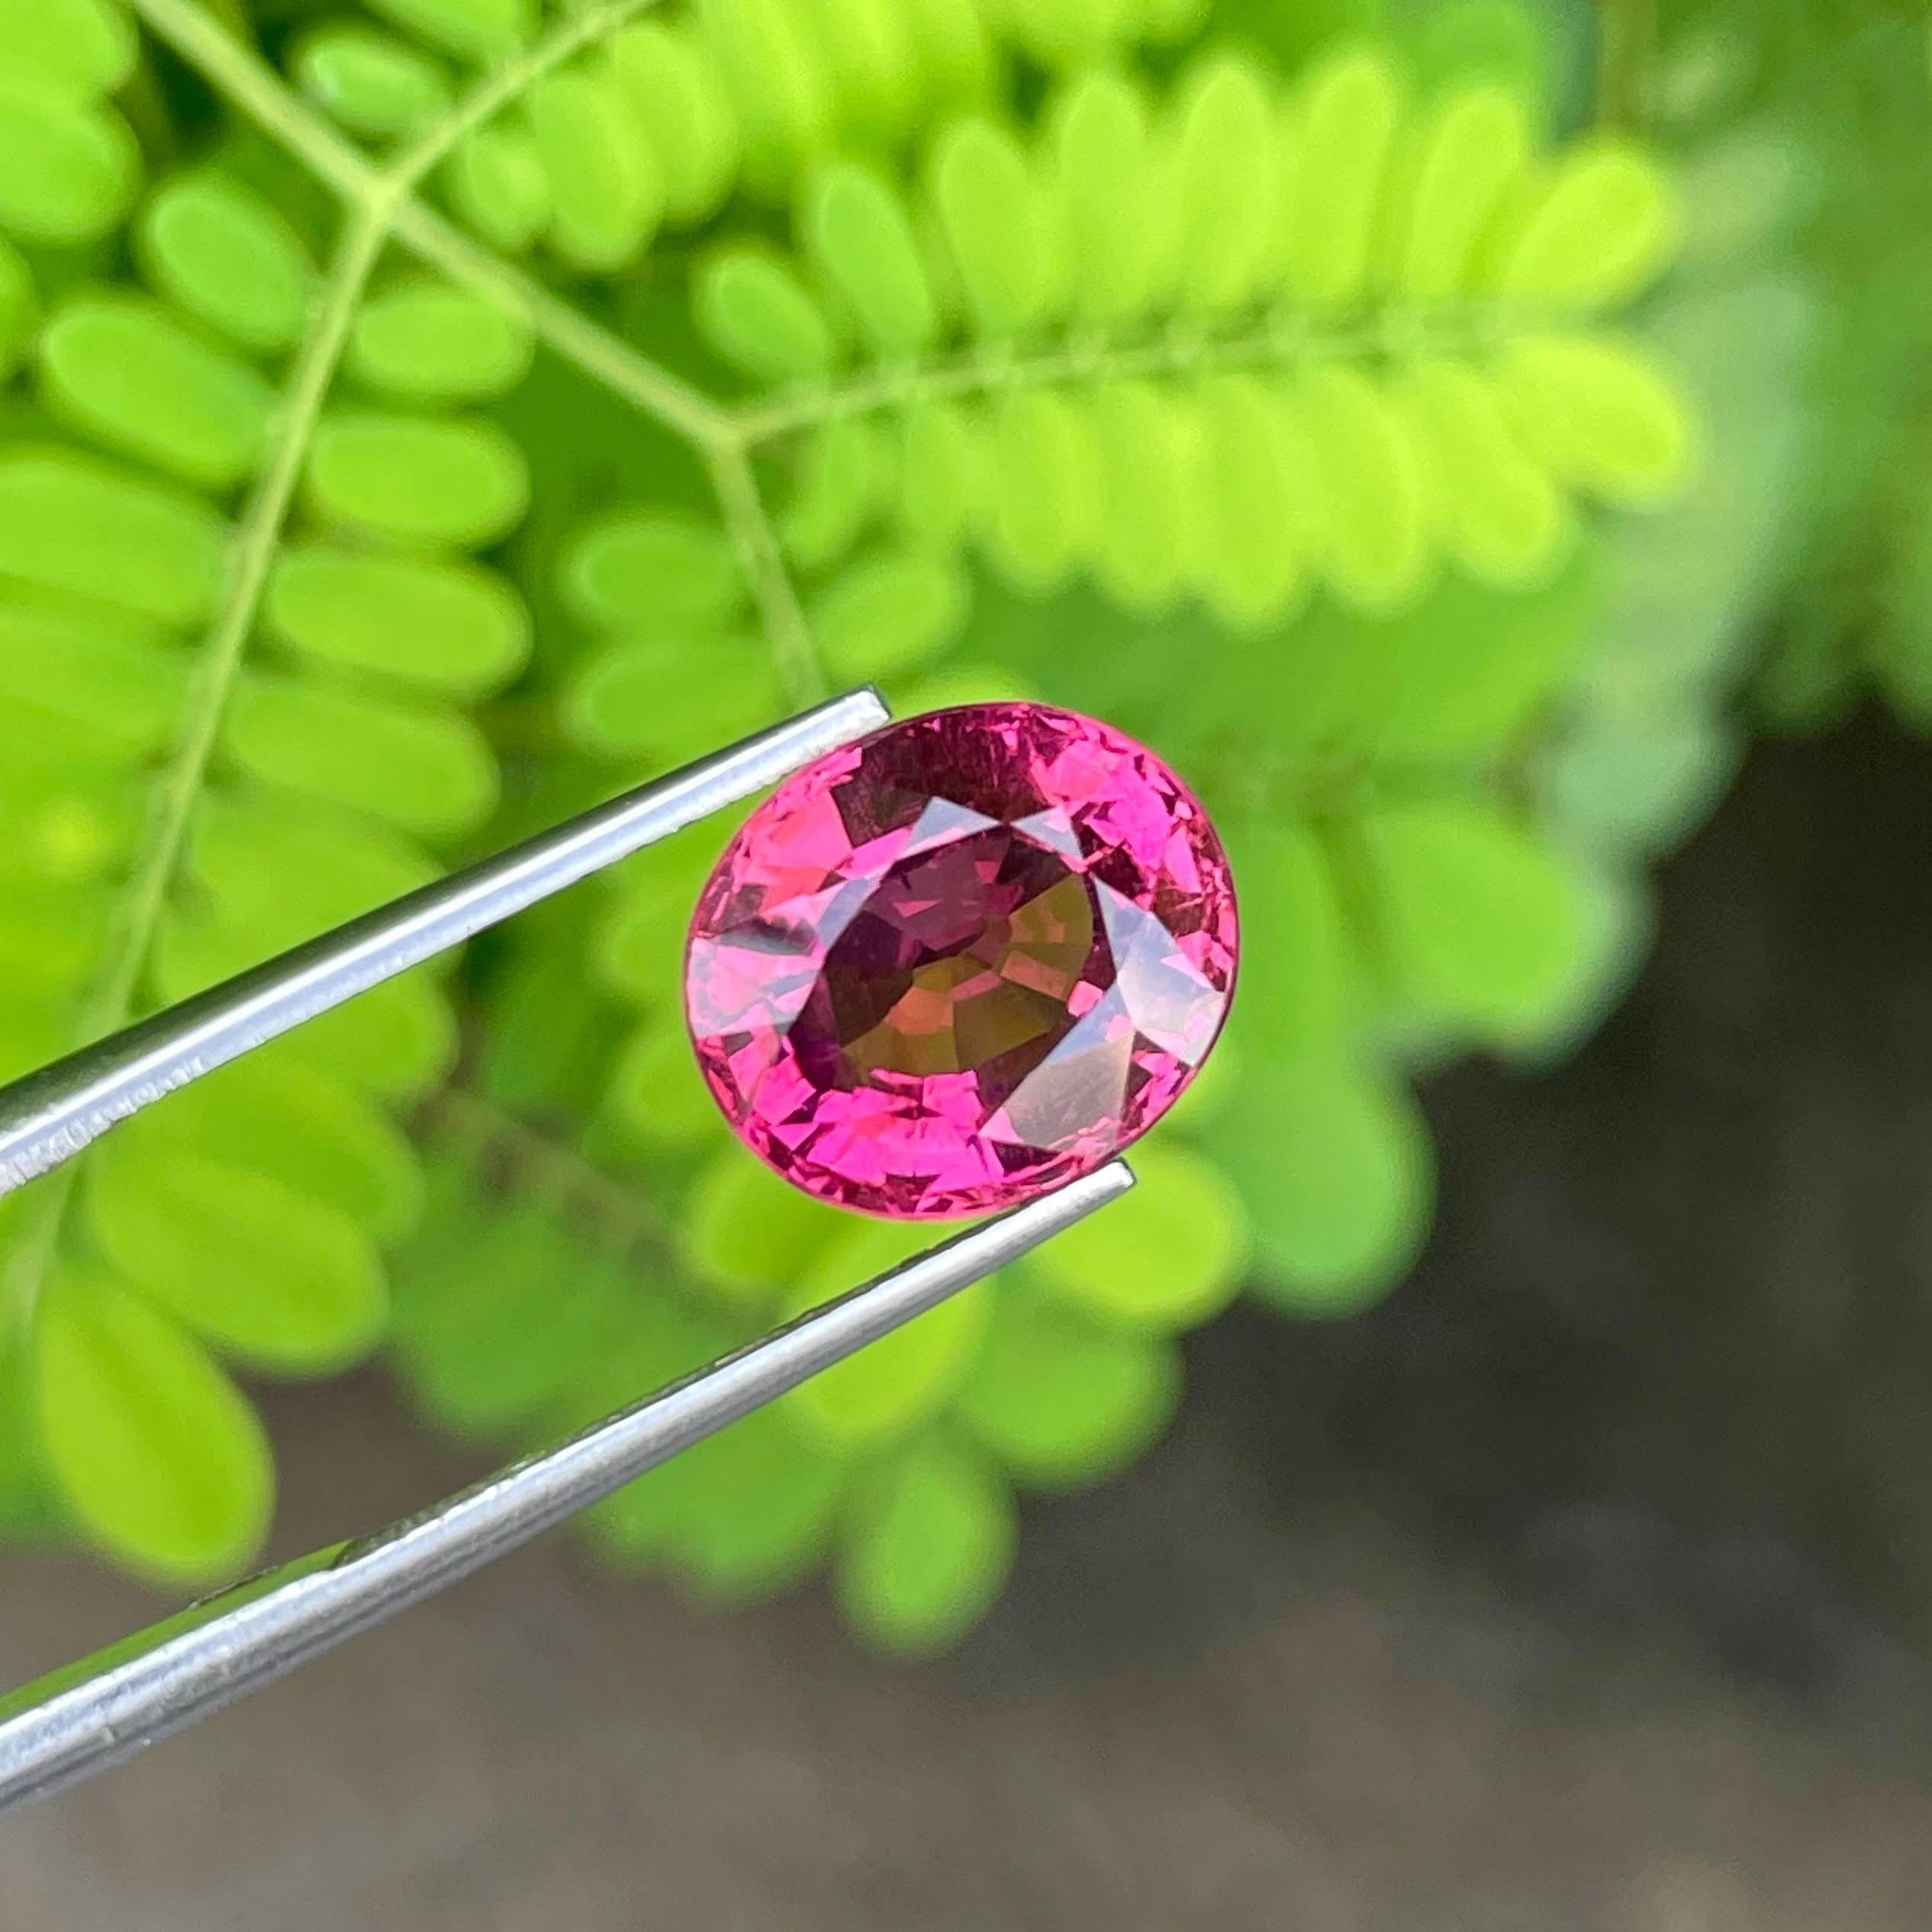 Modern Hot Pink Tourmaline Stone 4.80 carats Oval Cut Natural Gemstone from Nigeria For Sale